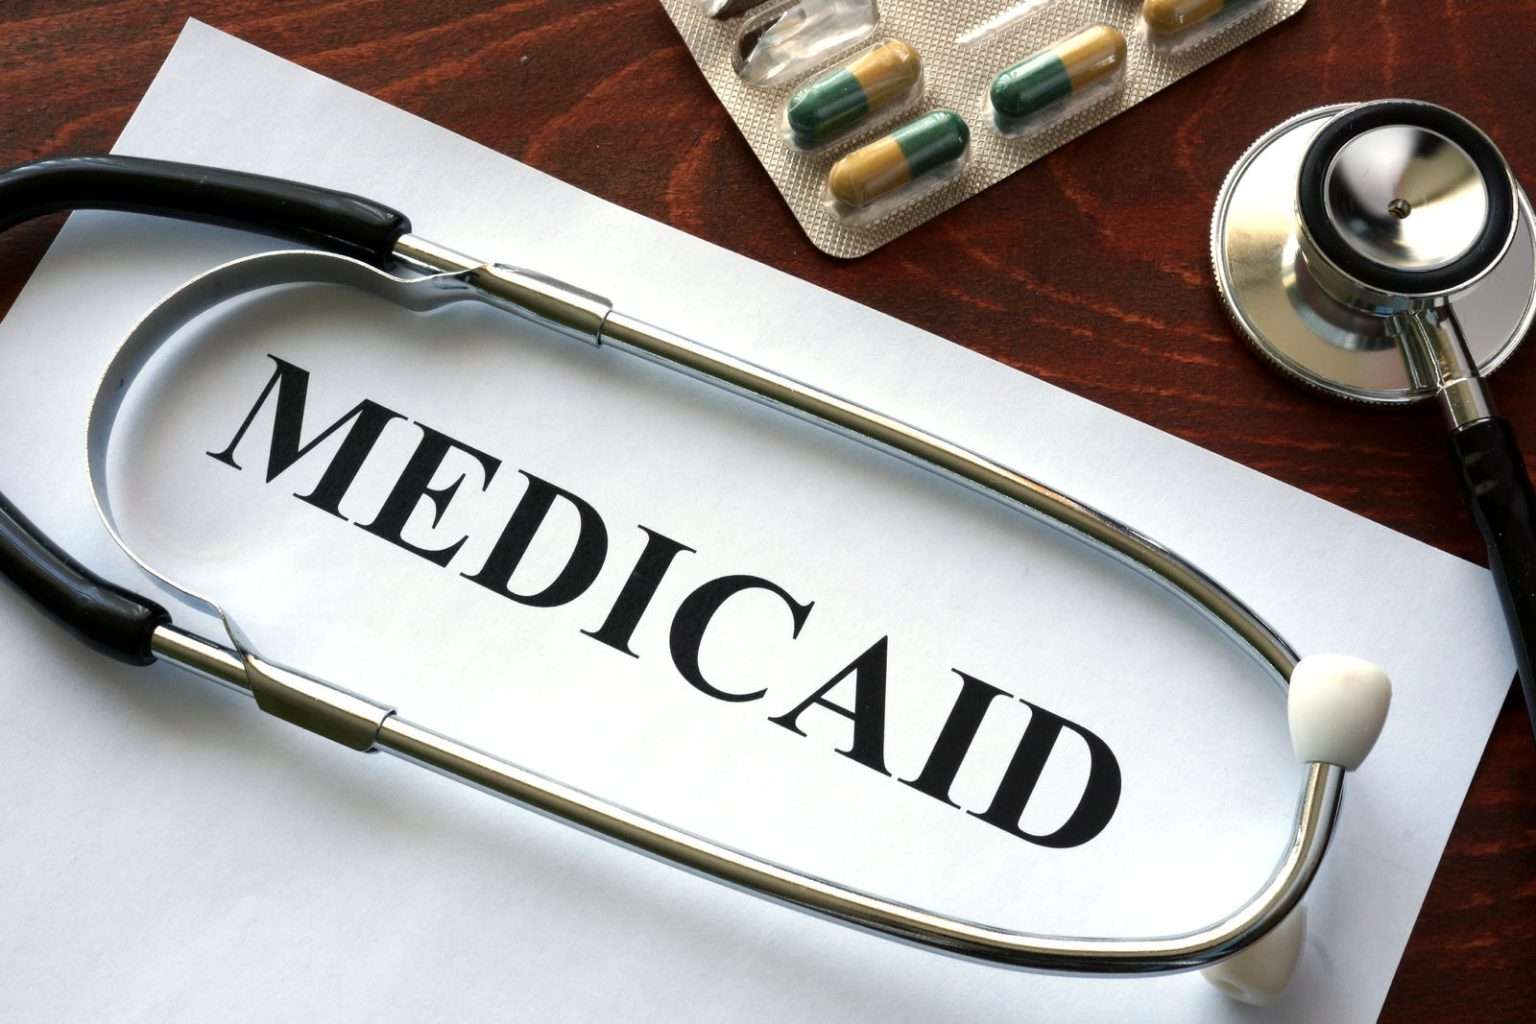 How to Find Out If My Medicaid Is Active?